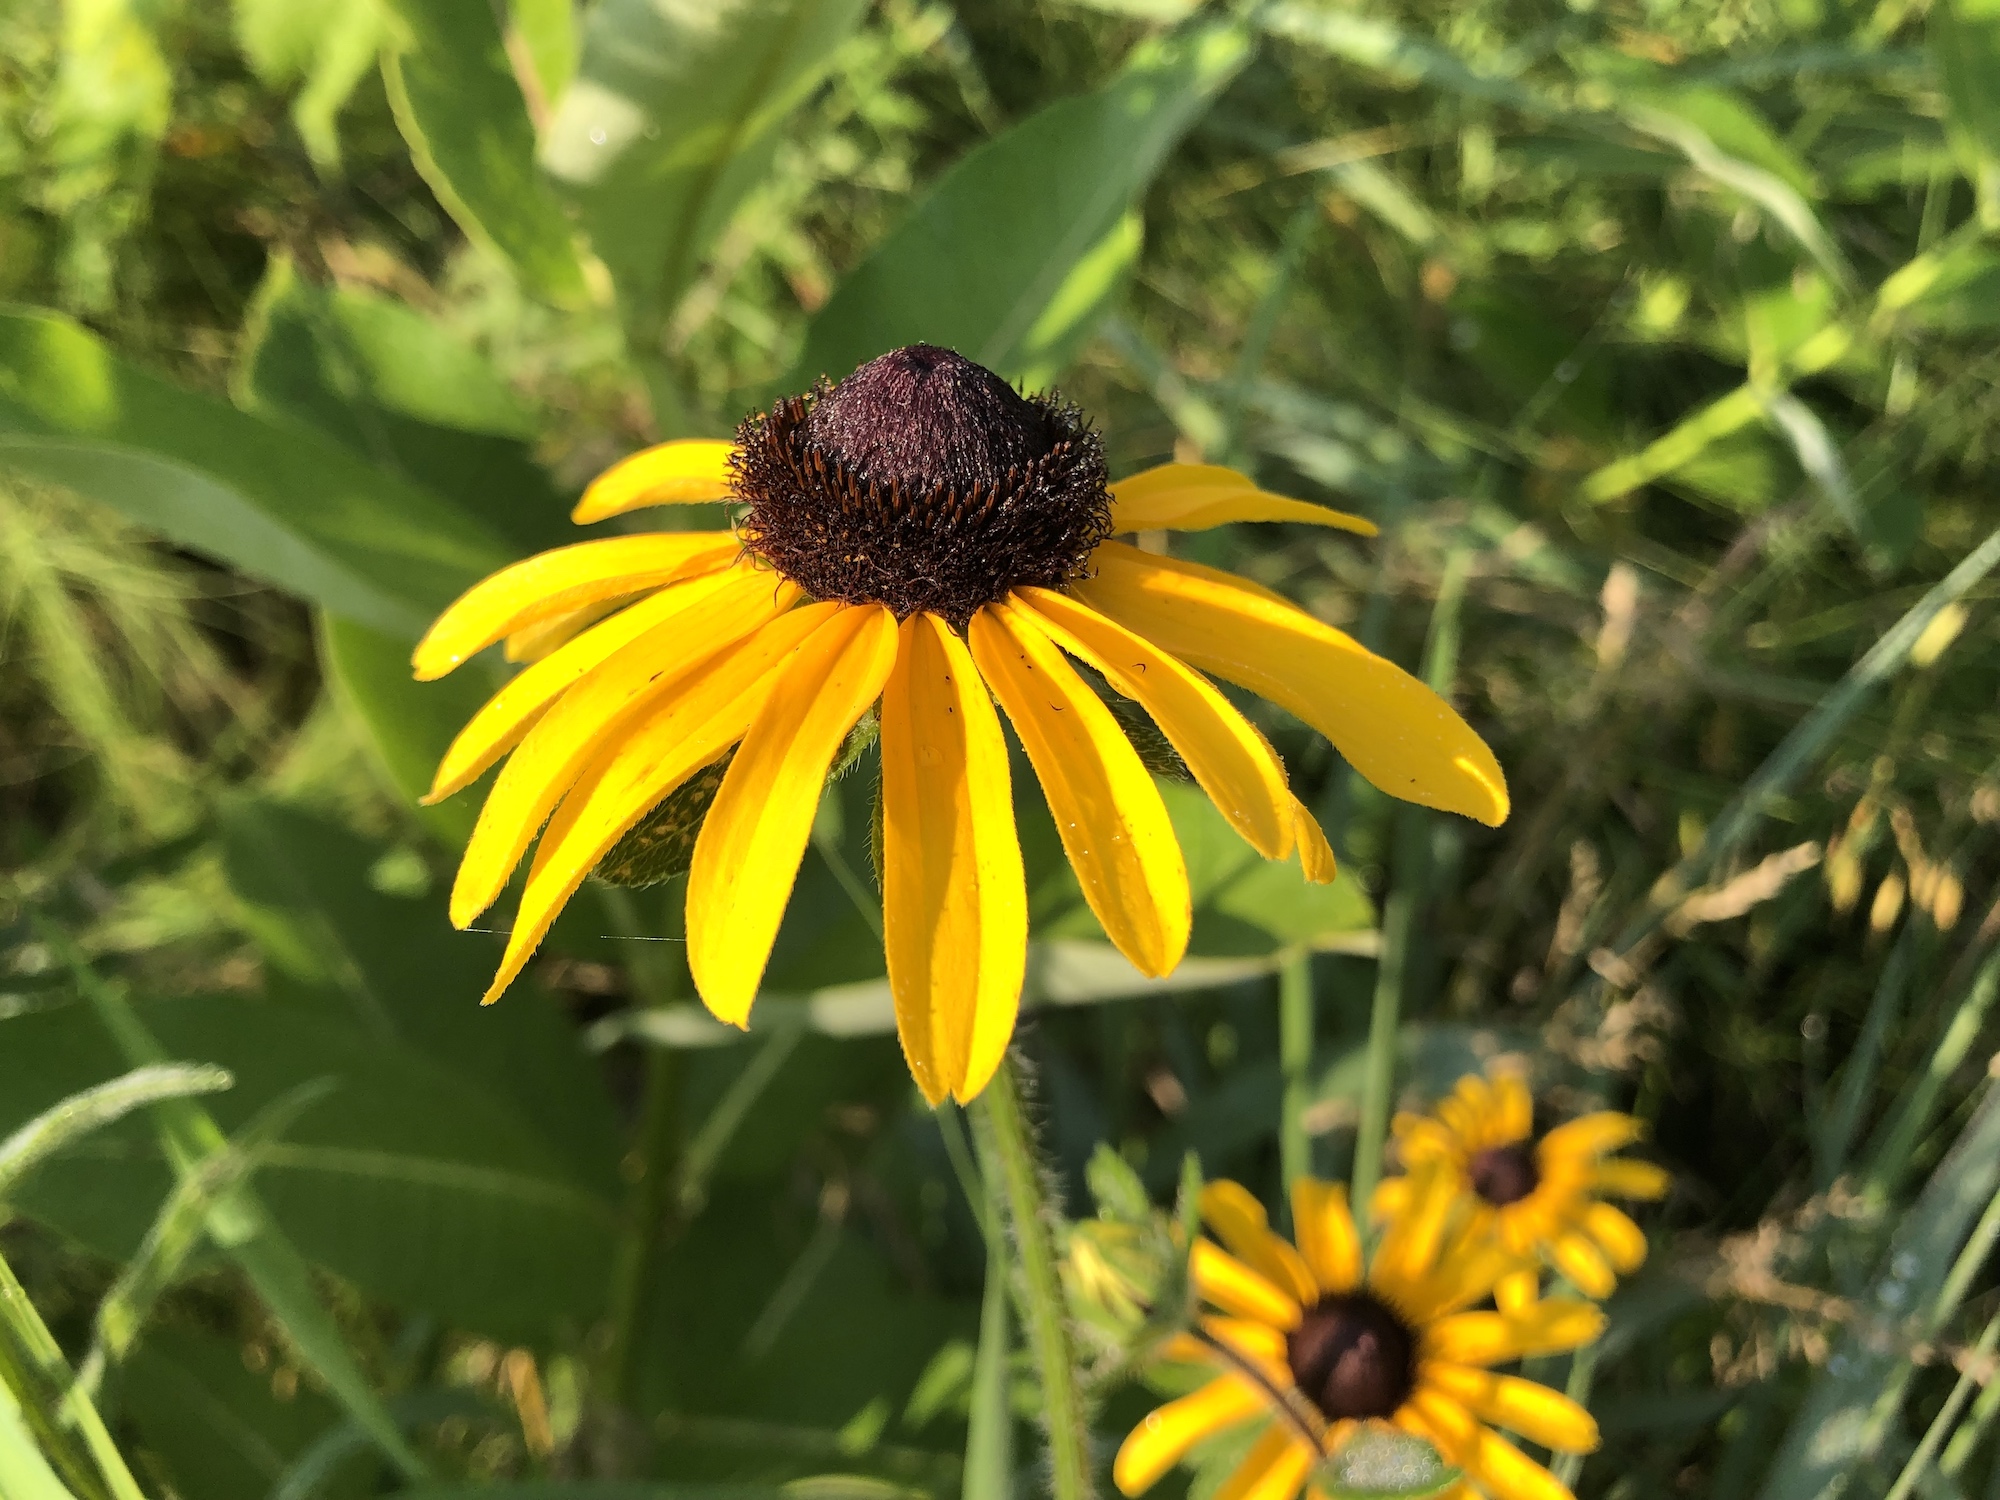 Black-eyed Susan on banks of Marion Dunn Pond in Madison, Wisconsin on July 8, 2019.